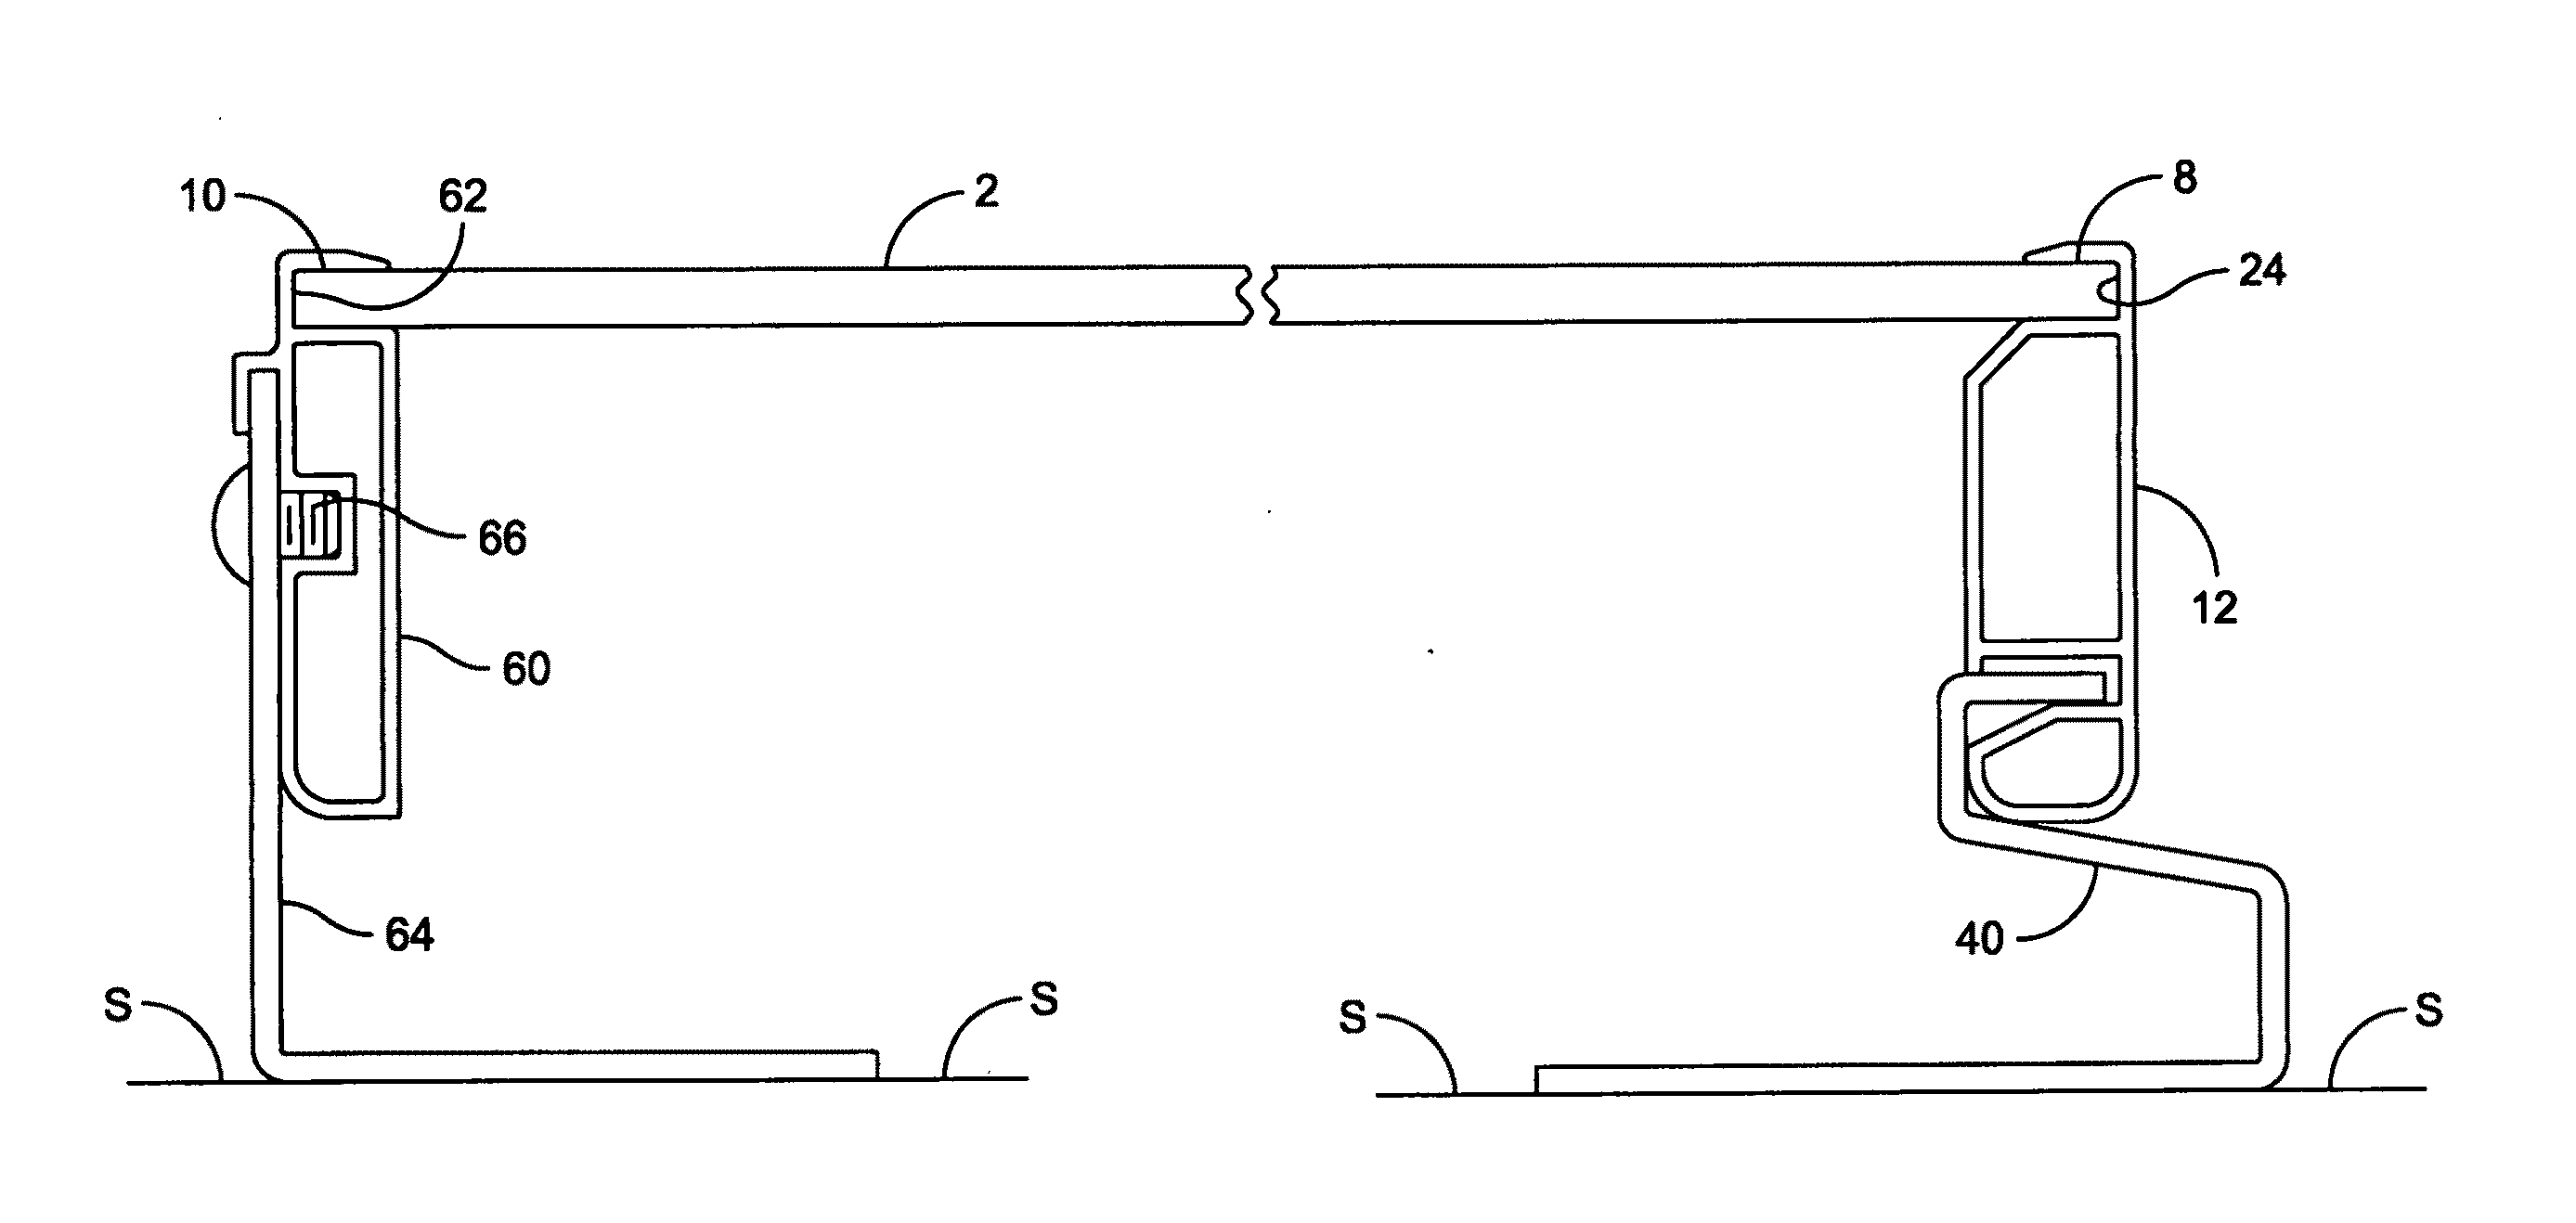 Assembly and method for mounting solar panels to structural surfaces